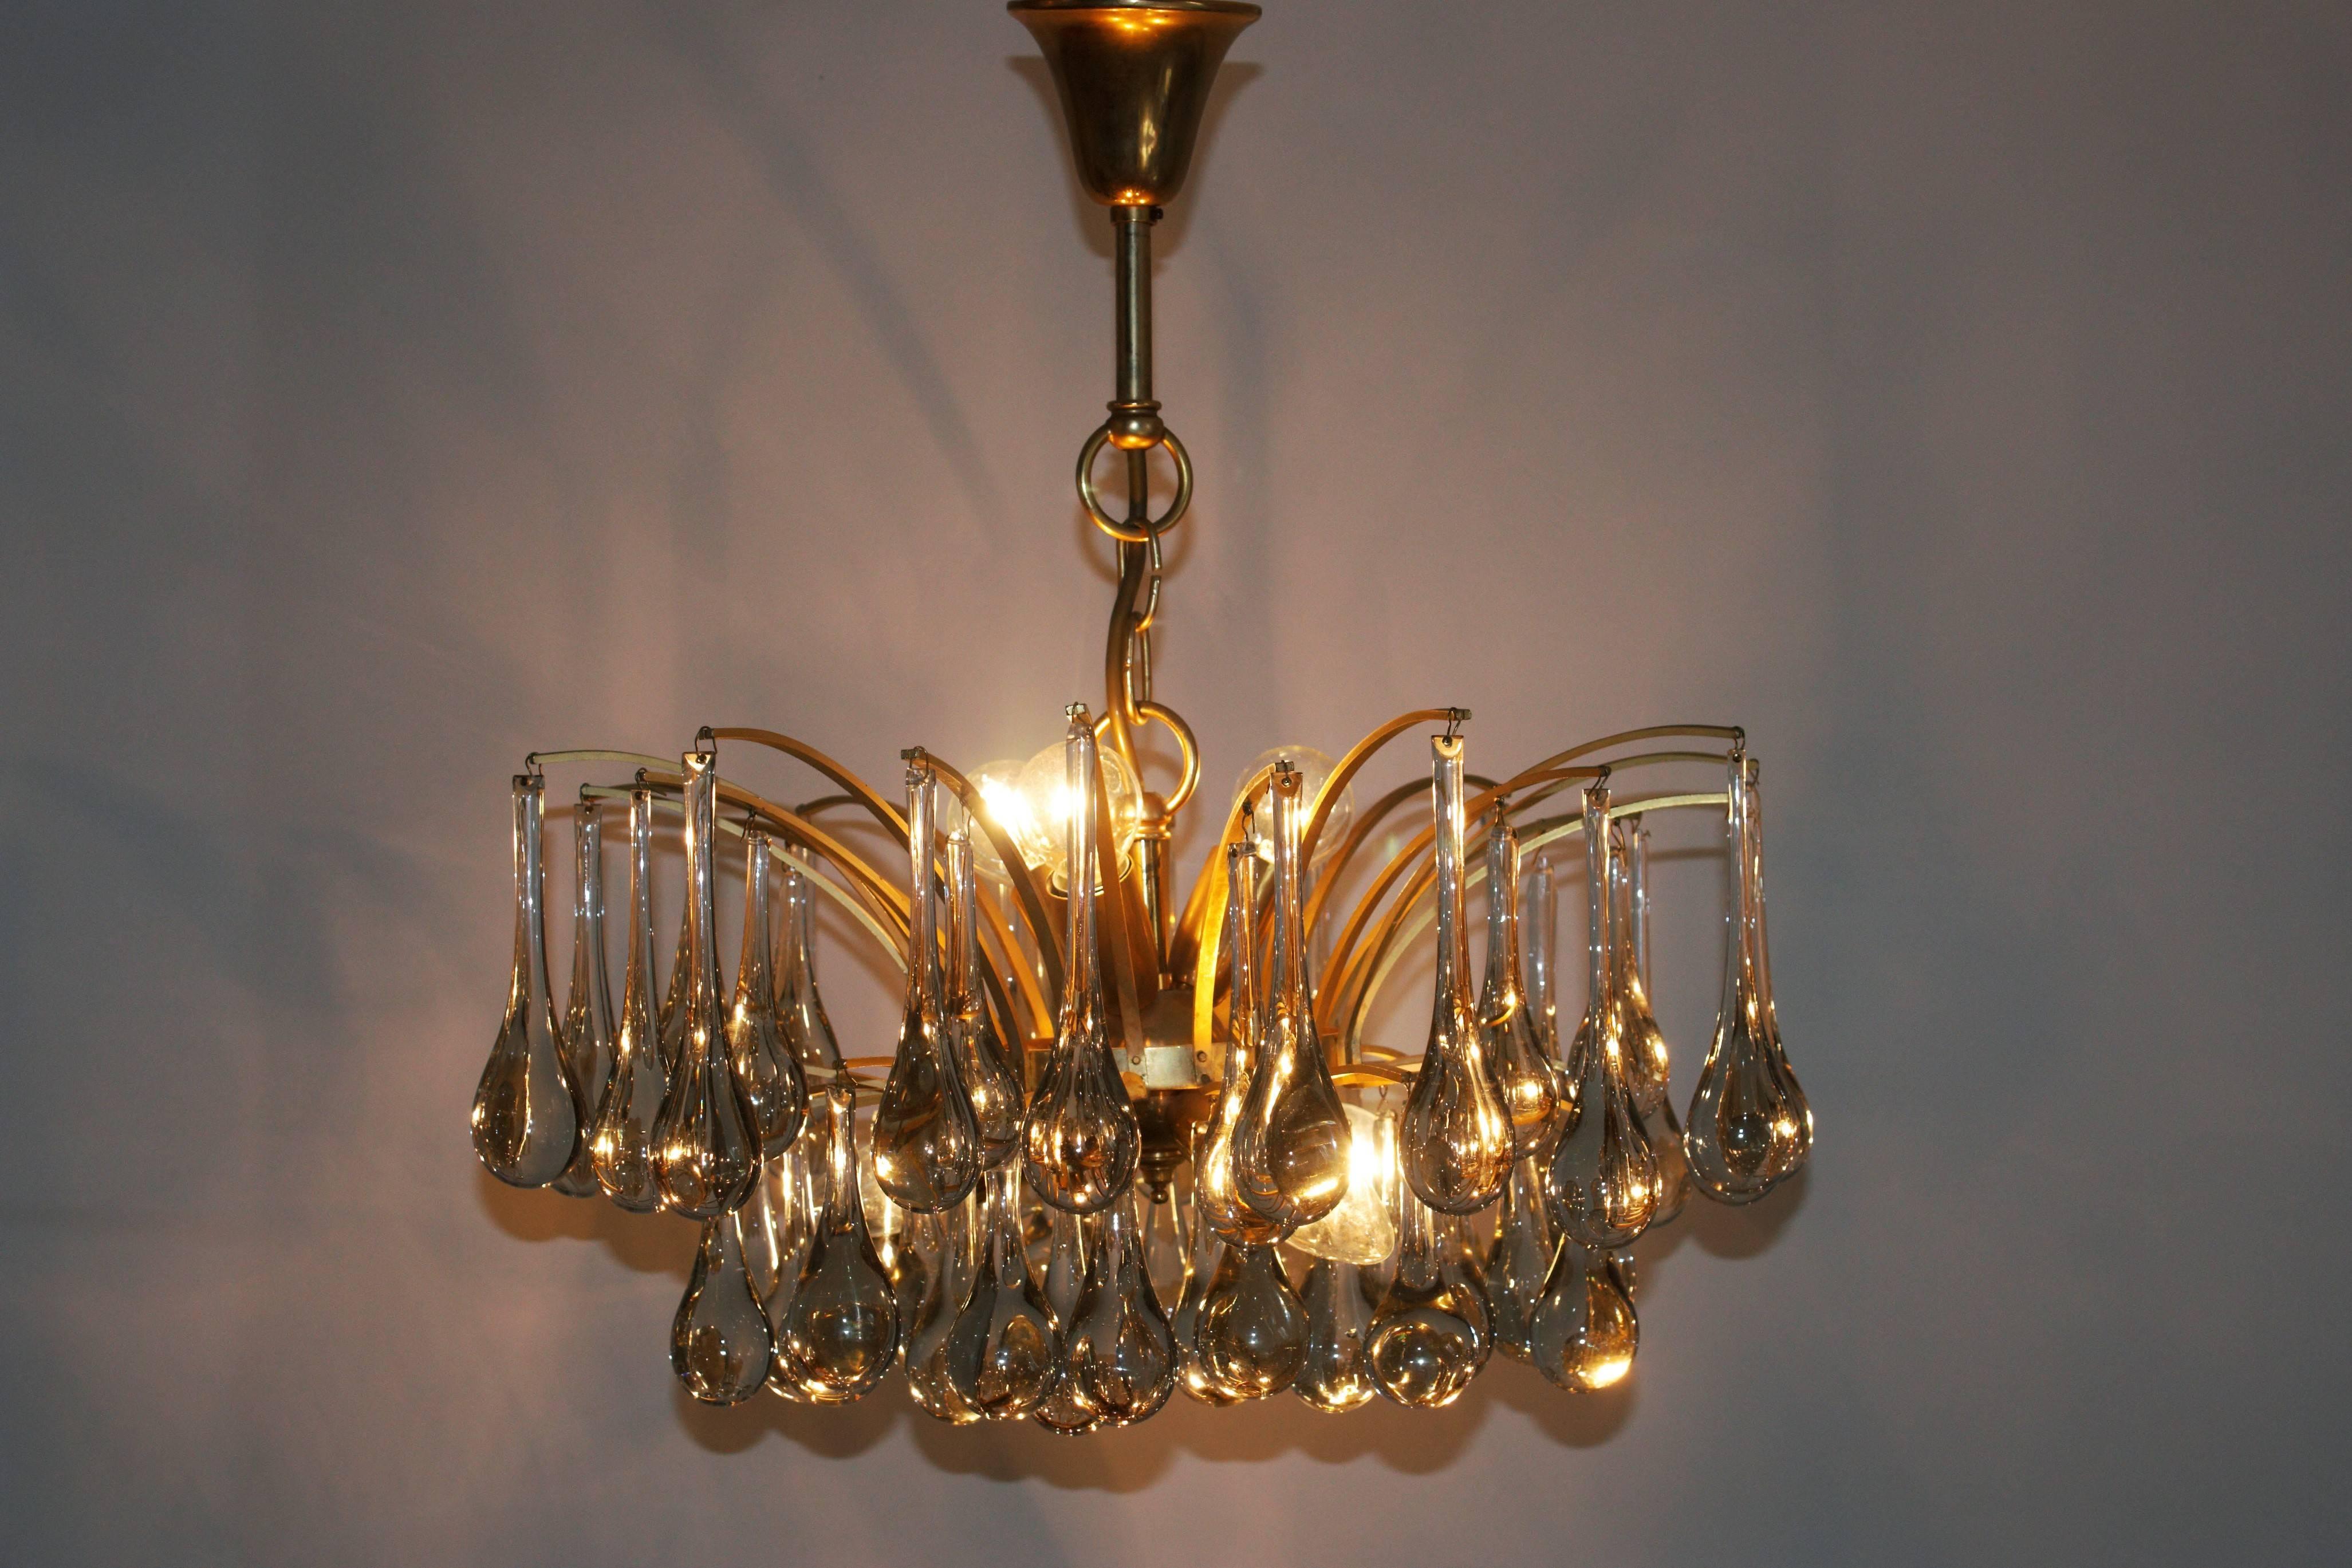 Wonderful, elegant, delicate Mid-Century glass chandelier, attributed by Ernst Palme, Germany, circa 1970s.
Six-light brass frame and clear Murano glass drops.
Very good condition.
Lamp socket: Six x E14 for Edison standard screw bulbs.
Pair